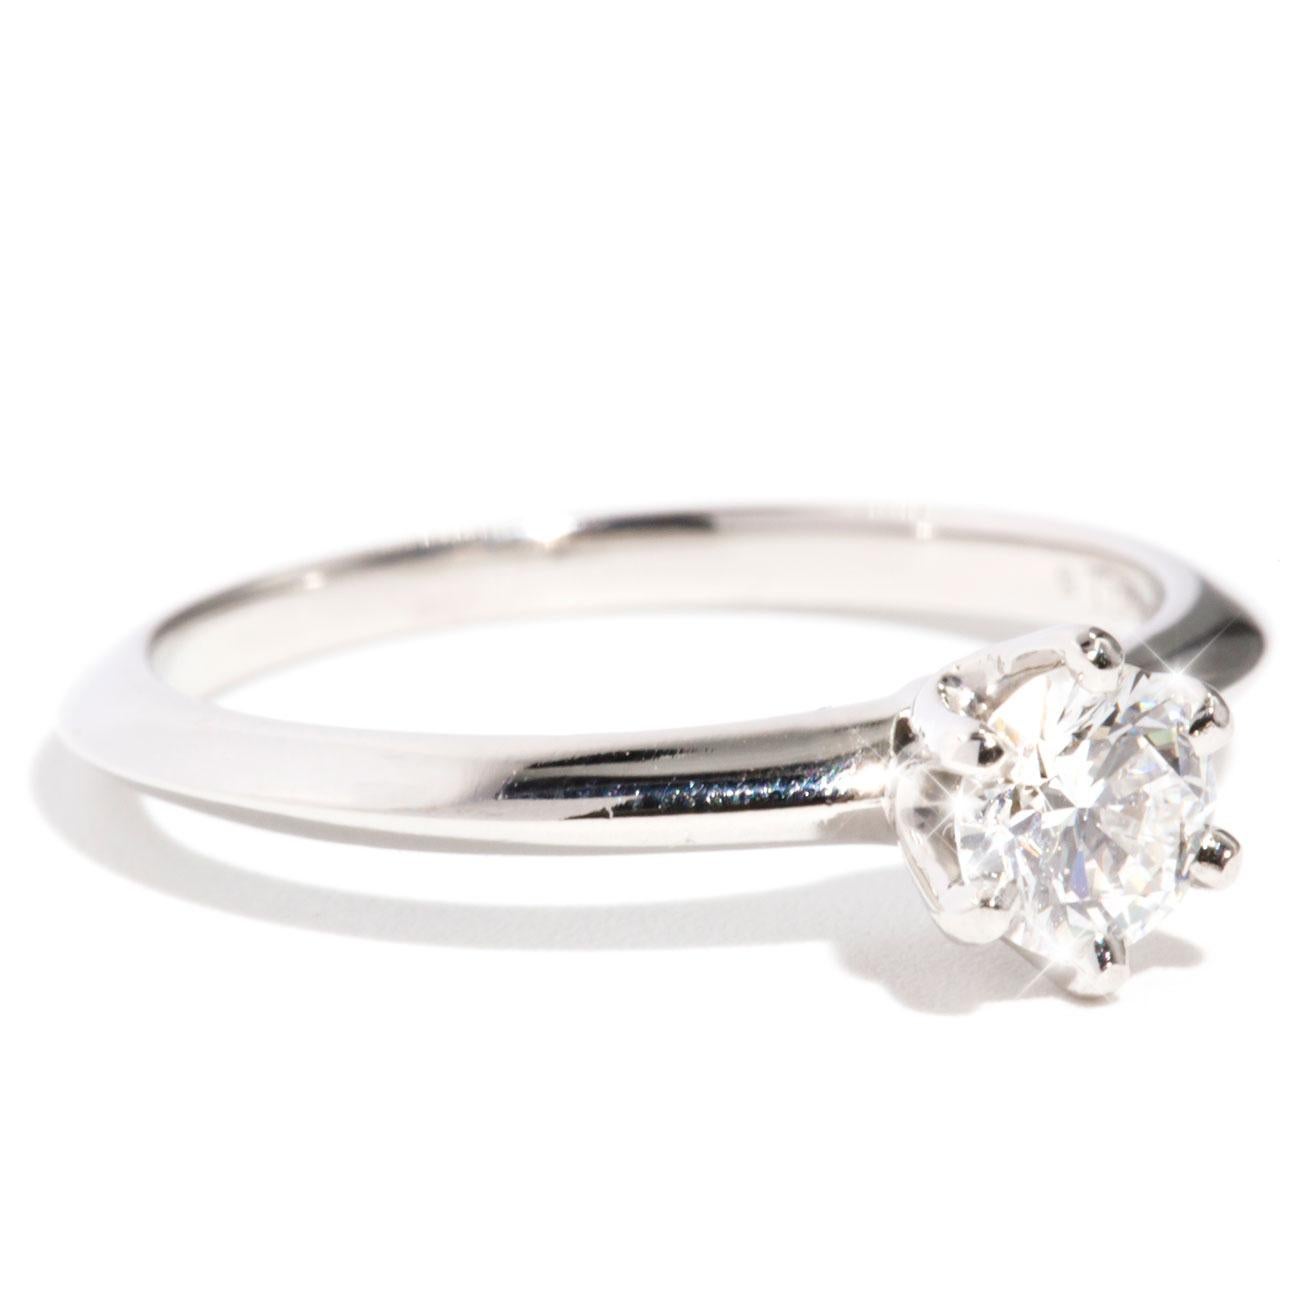 Crafted in Platinum is this genuine Tiffany & Co. 'The Tiffany Setting' solitaire Engagement Ring. The Tiffany & Co. engagement ring features a 0.40 carat round brilliant cut diamond set in the infamous 'Tiffany' setting.  This gorgeous ring is